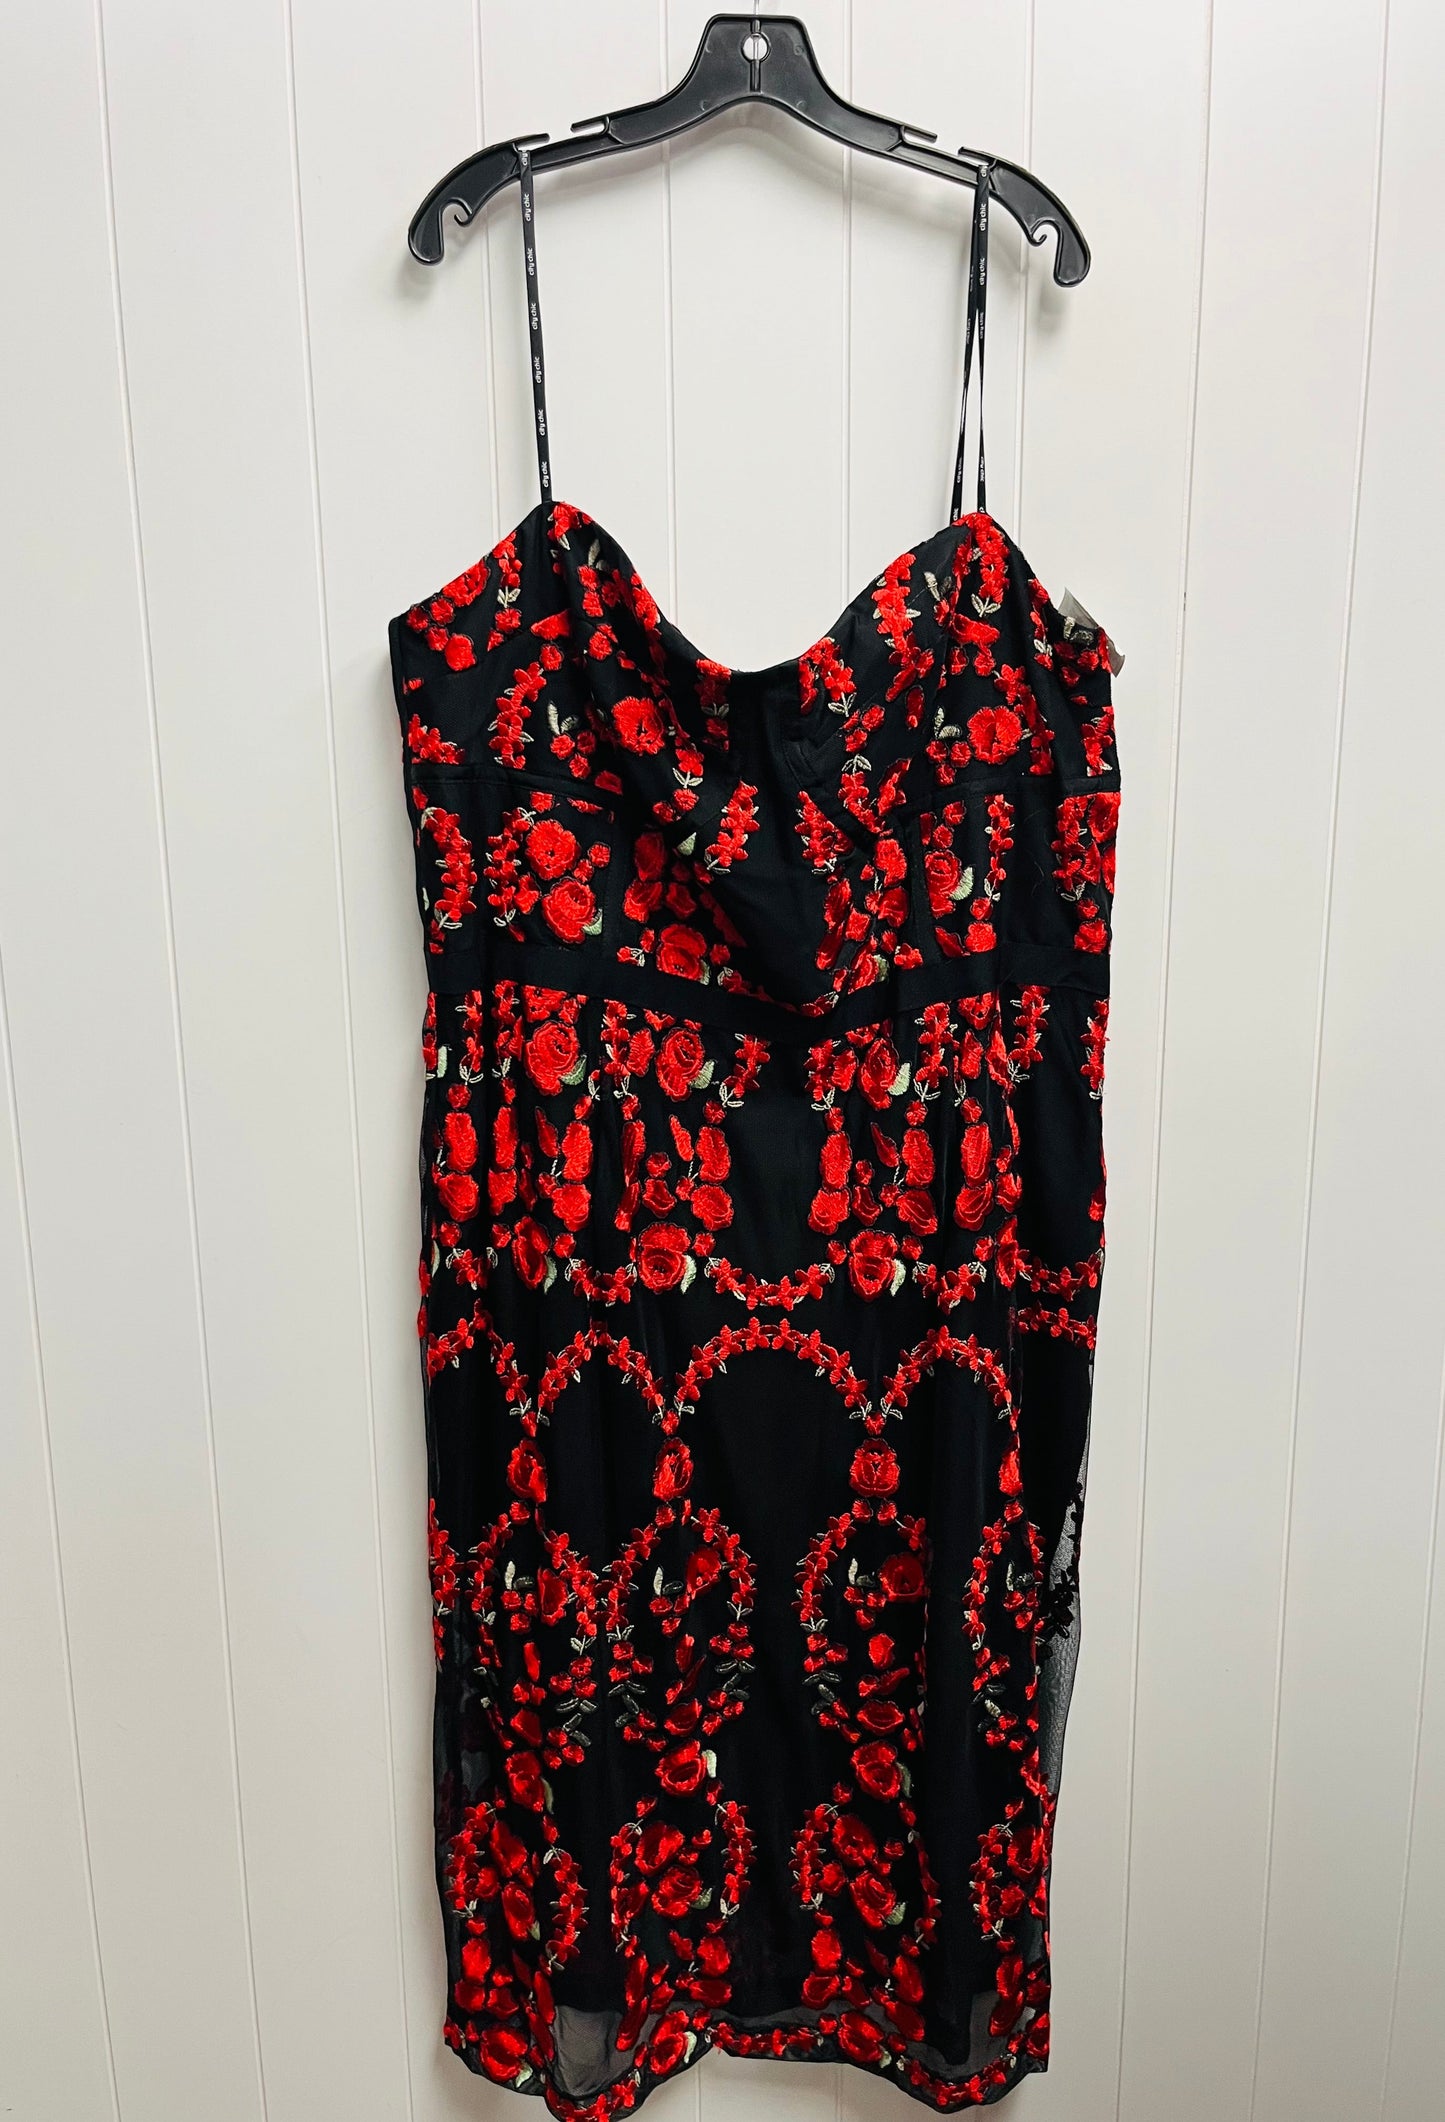 Black & Red Dress Party Midi City Chic, Size 22